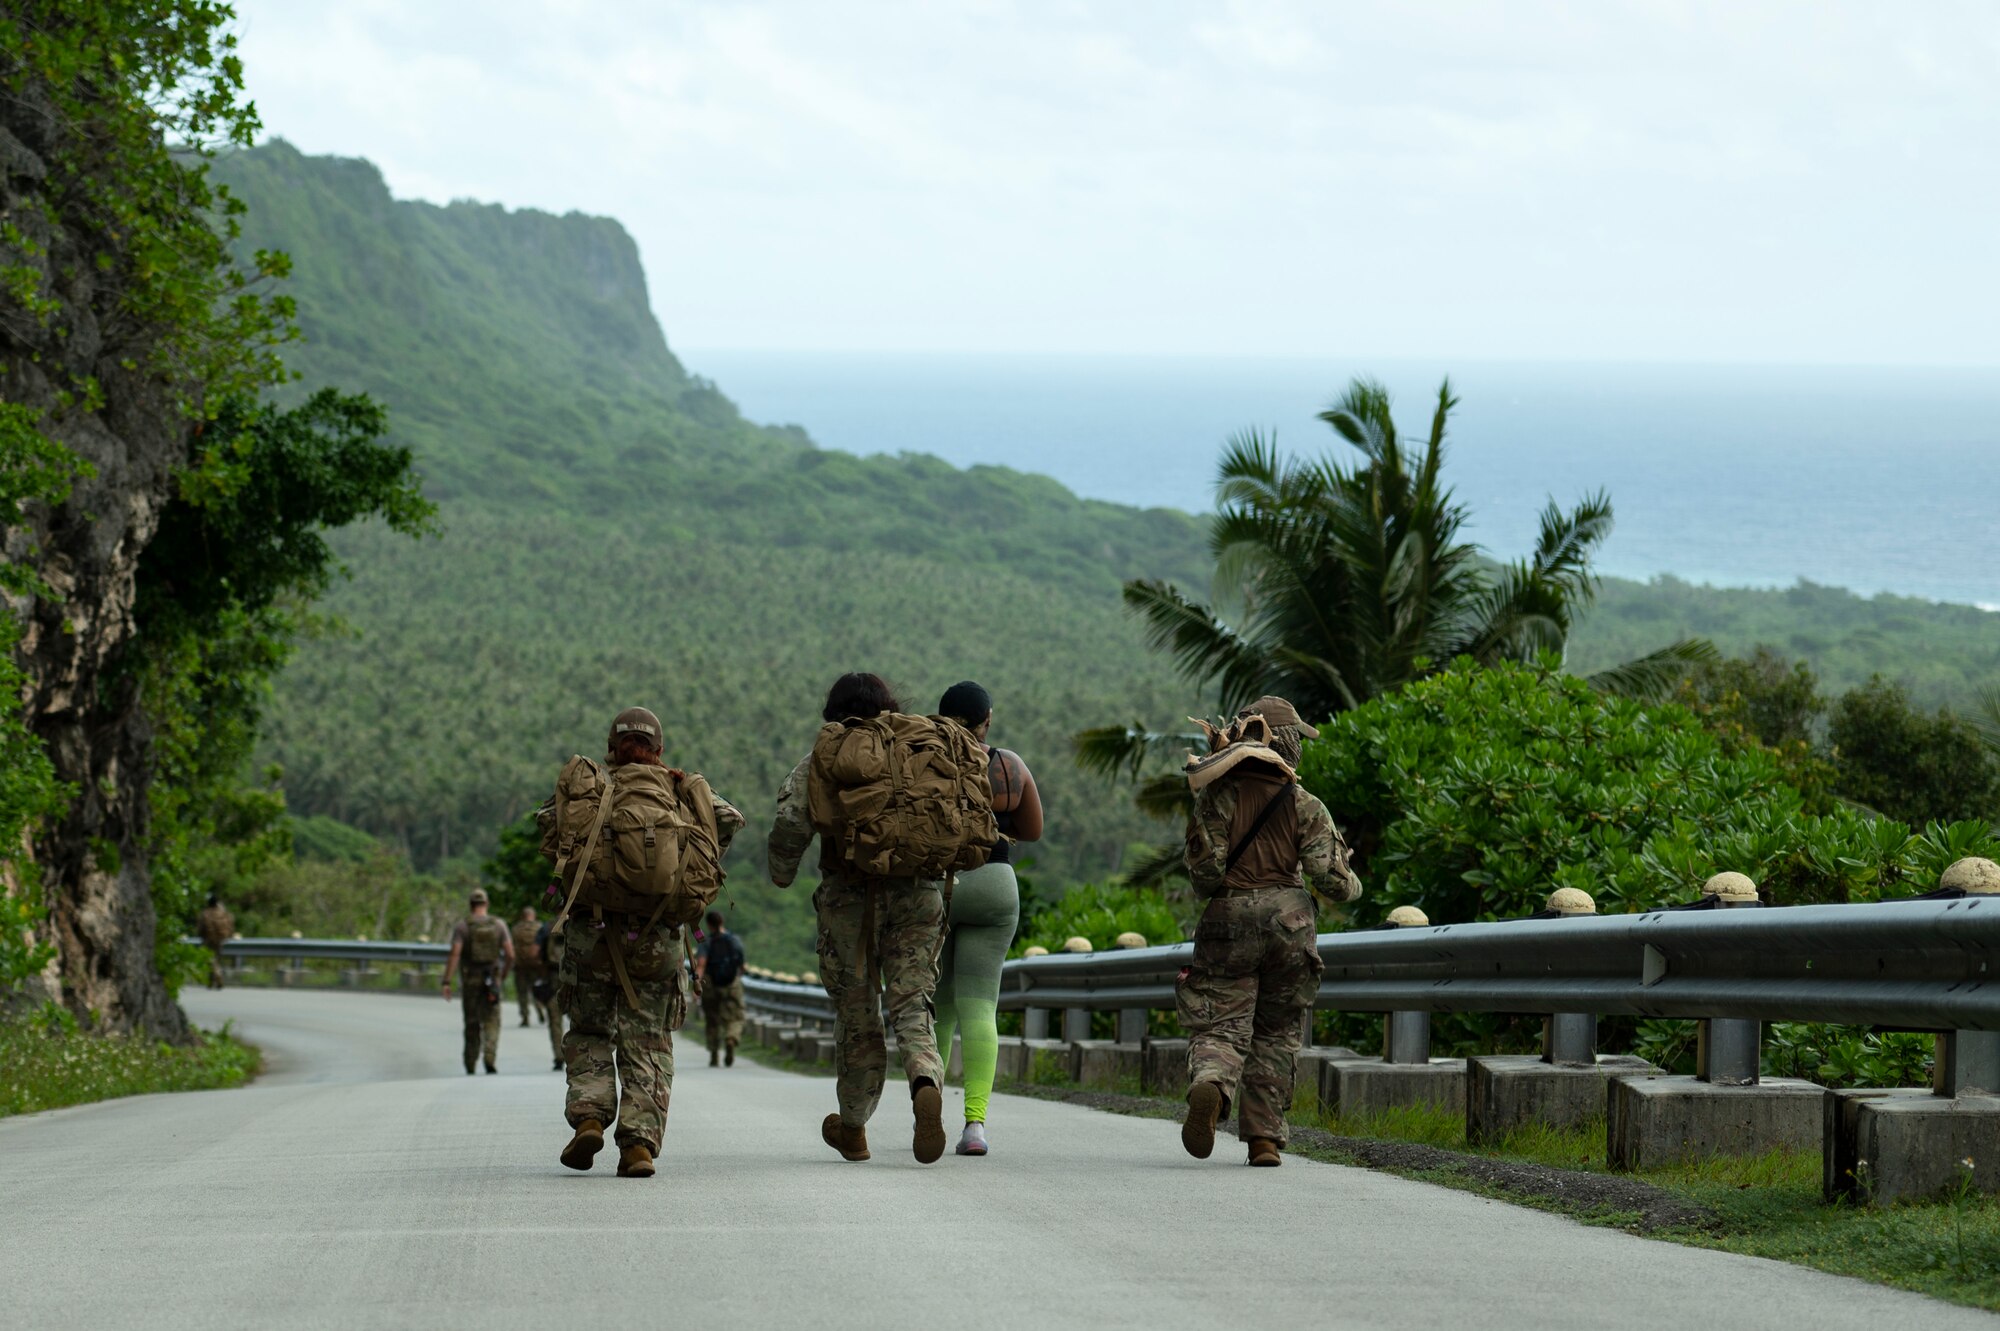 U.S. Air Force service members walk down Sanders Slope during the Office of Special Investigations’ Hustler-6 memorial on Andersen Air Force Base, Guam, Dec. 21, 2022. Since 2016, OSI agents assigned to Andersen AFB have annually honored the Hustler-6, who lost their lives during a mission near Bagram, Afghanistan on Dec. 21, 2015, by rucking up and down Sanders Slope. (U.S. Air Force photo by Airman Spencer Perkins)